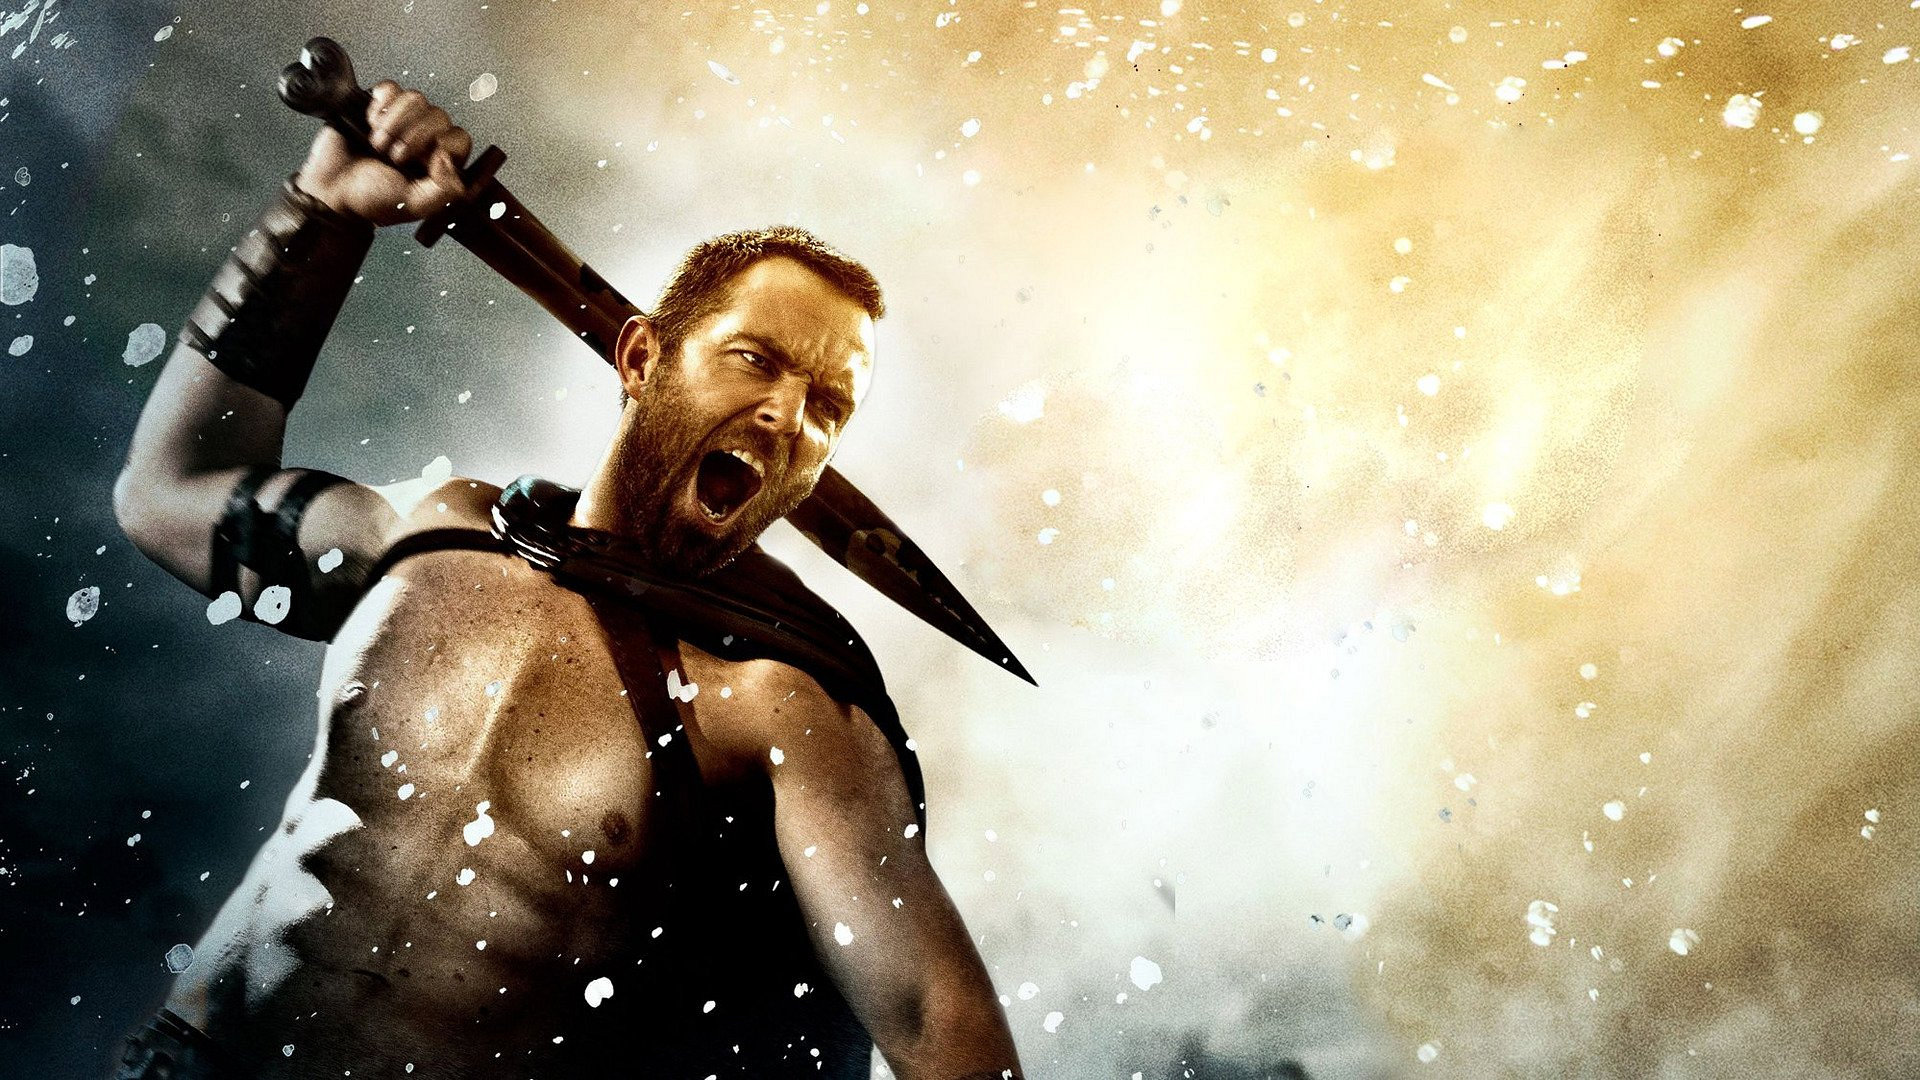 300: Rise of an Empire